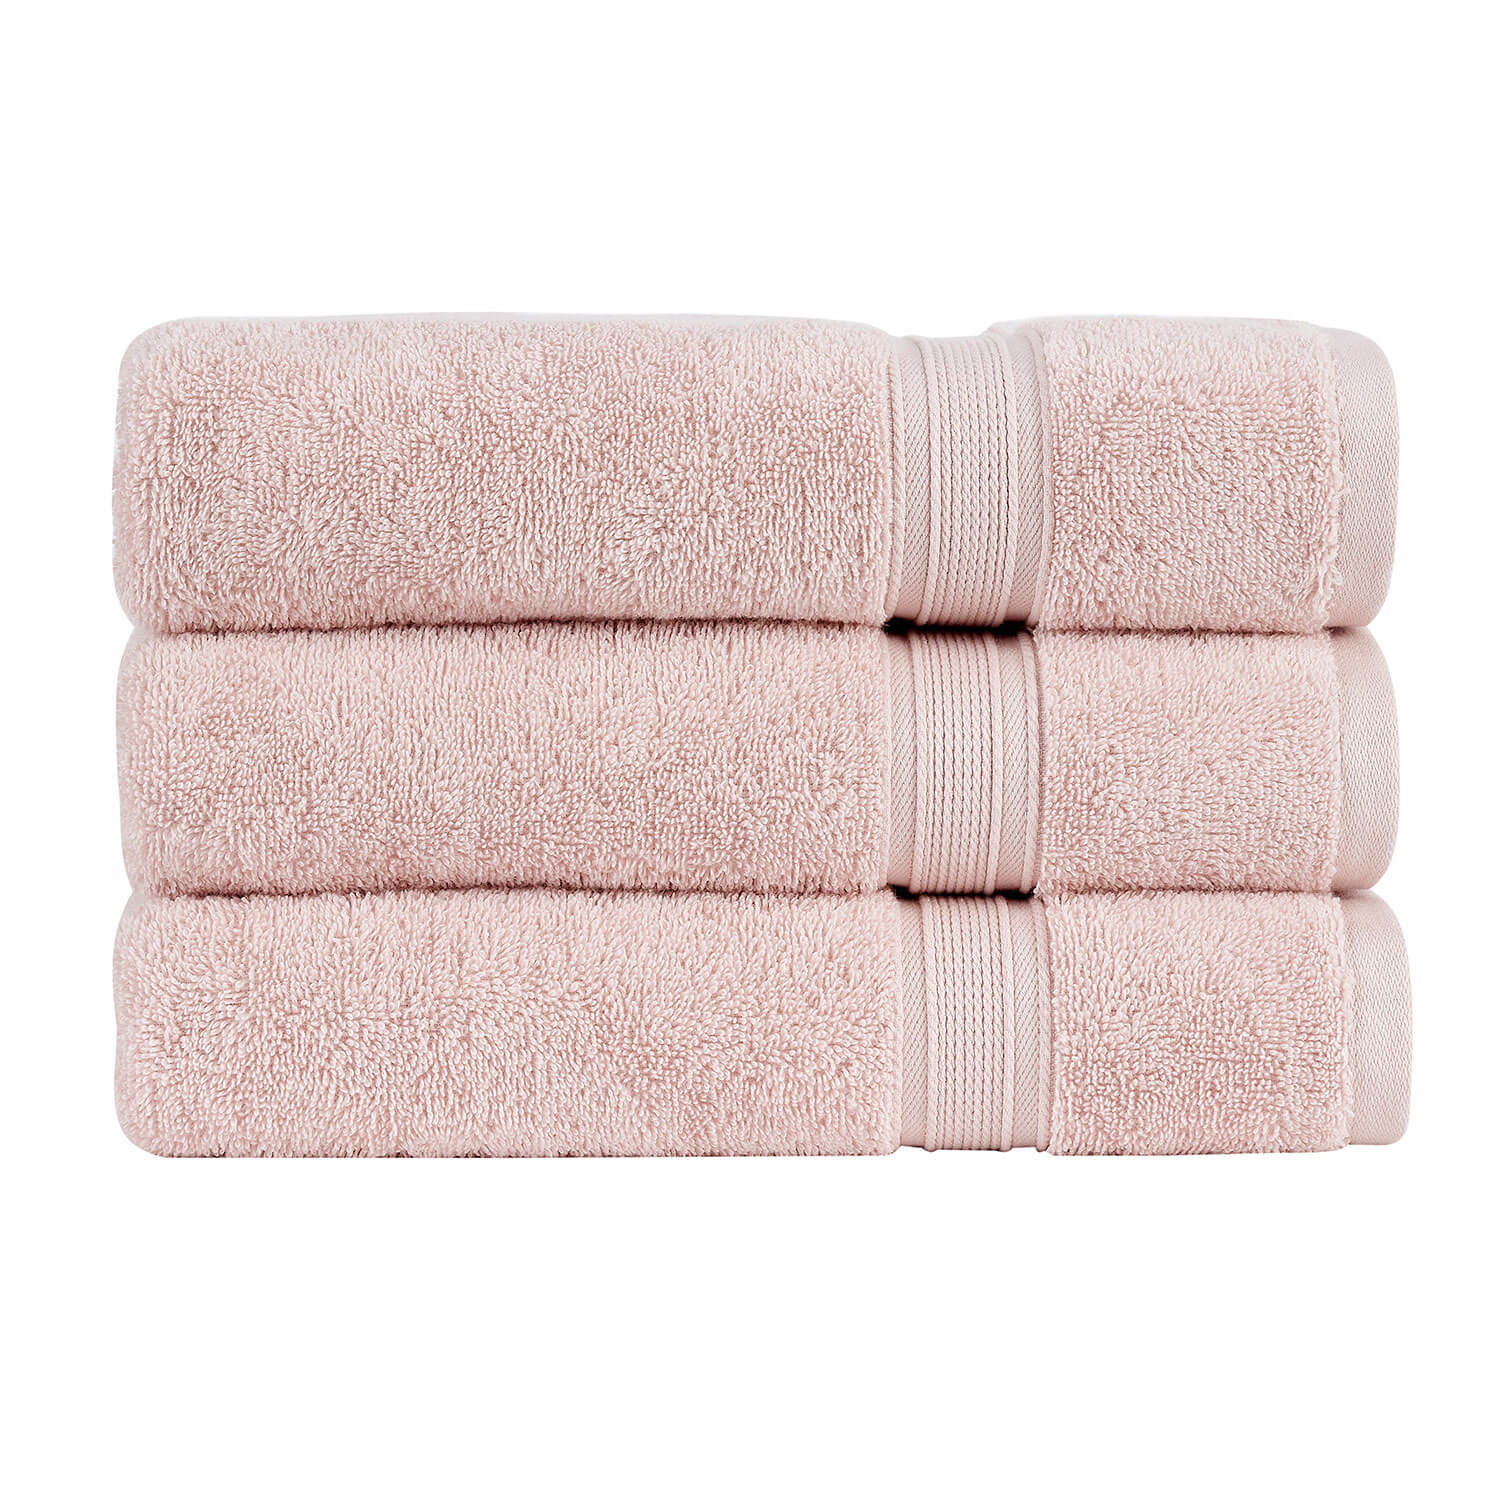 Christy Serene Bath Towel - Dusty Pink 1 Shaws Department Stores